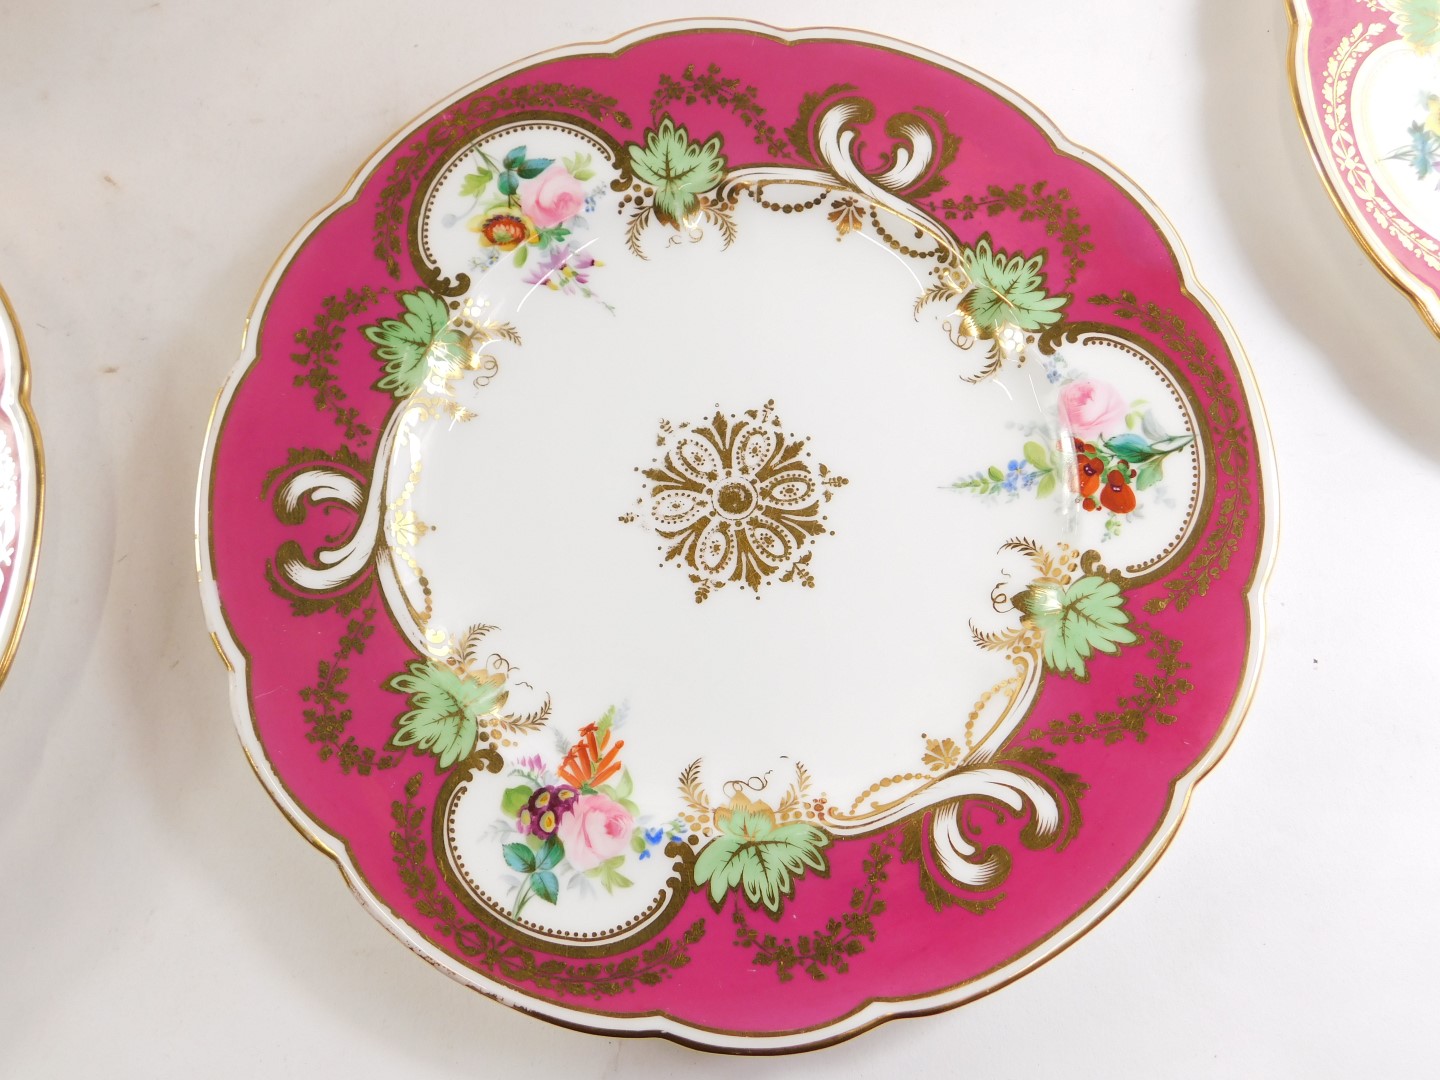 A 19thC porcelain dessert service, with puce border, painted with flower sprays, picked out in gilt, - Image 3 of 3